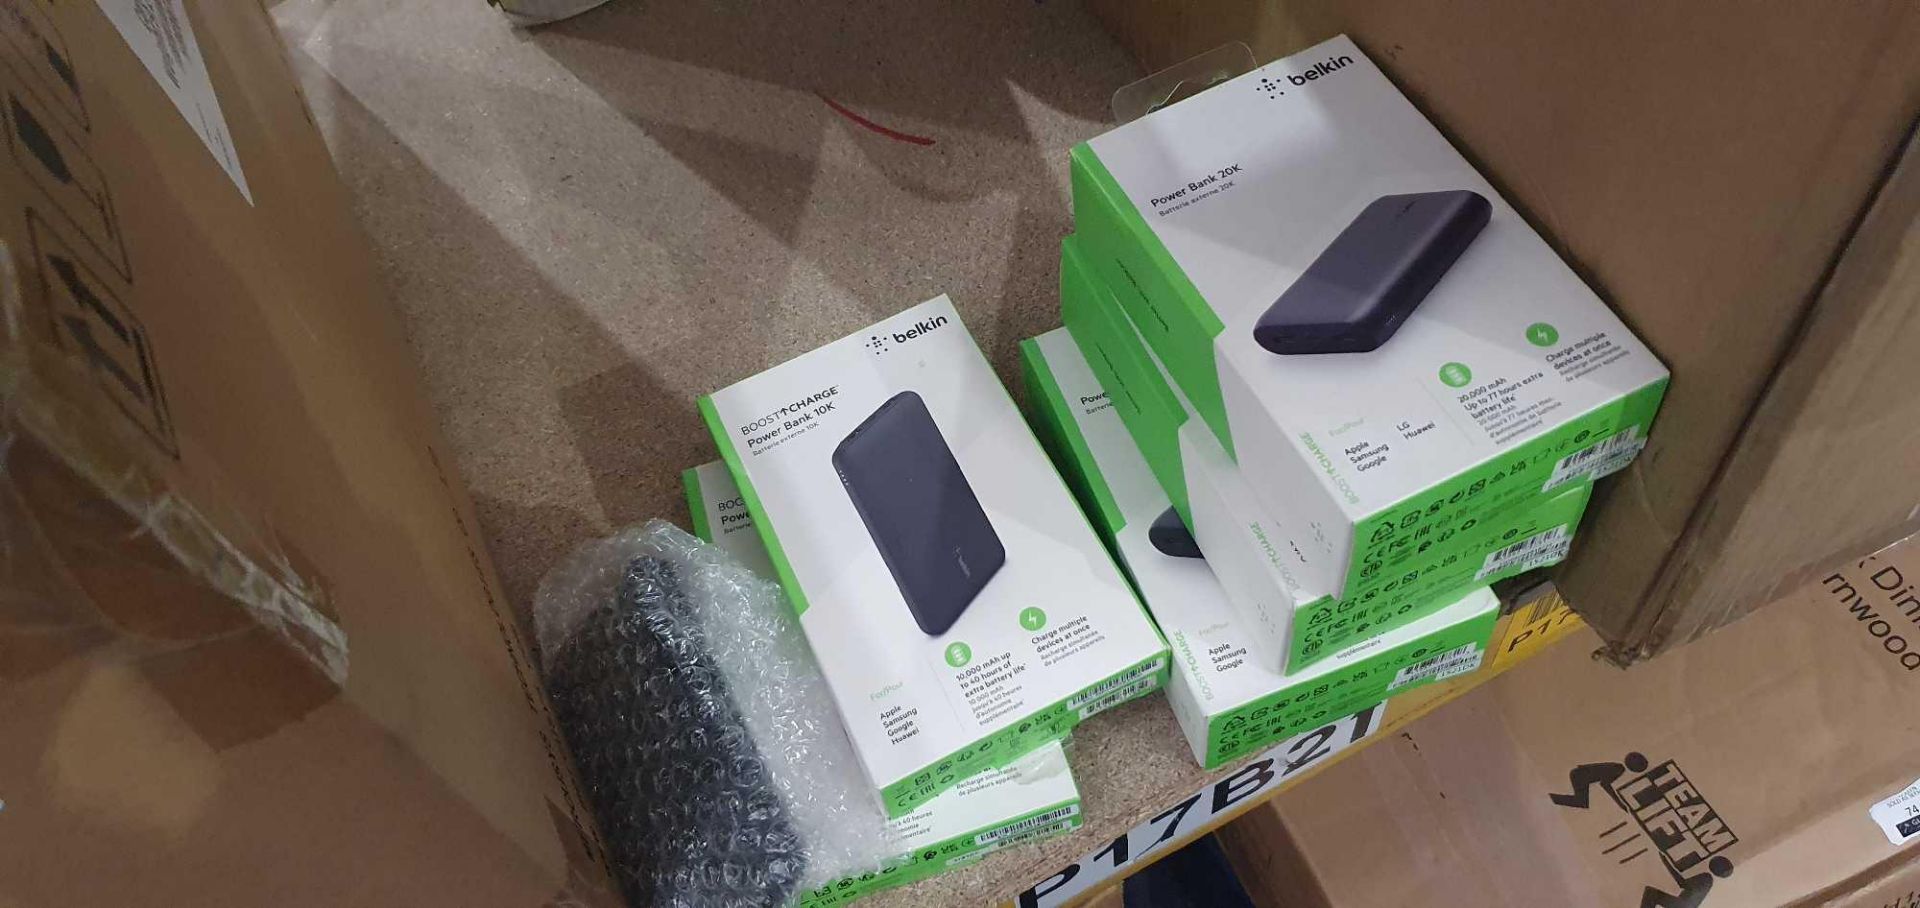 RRP £230 Lot To Contain 6X Items 3X Boxed Belkin 20K Power Bank 2X Boxed Belkin 10K Power Bank 1X - Image 2 of 2